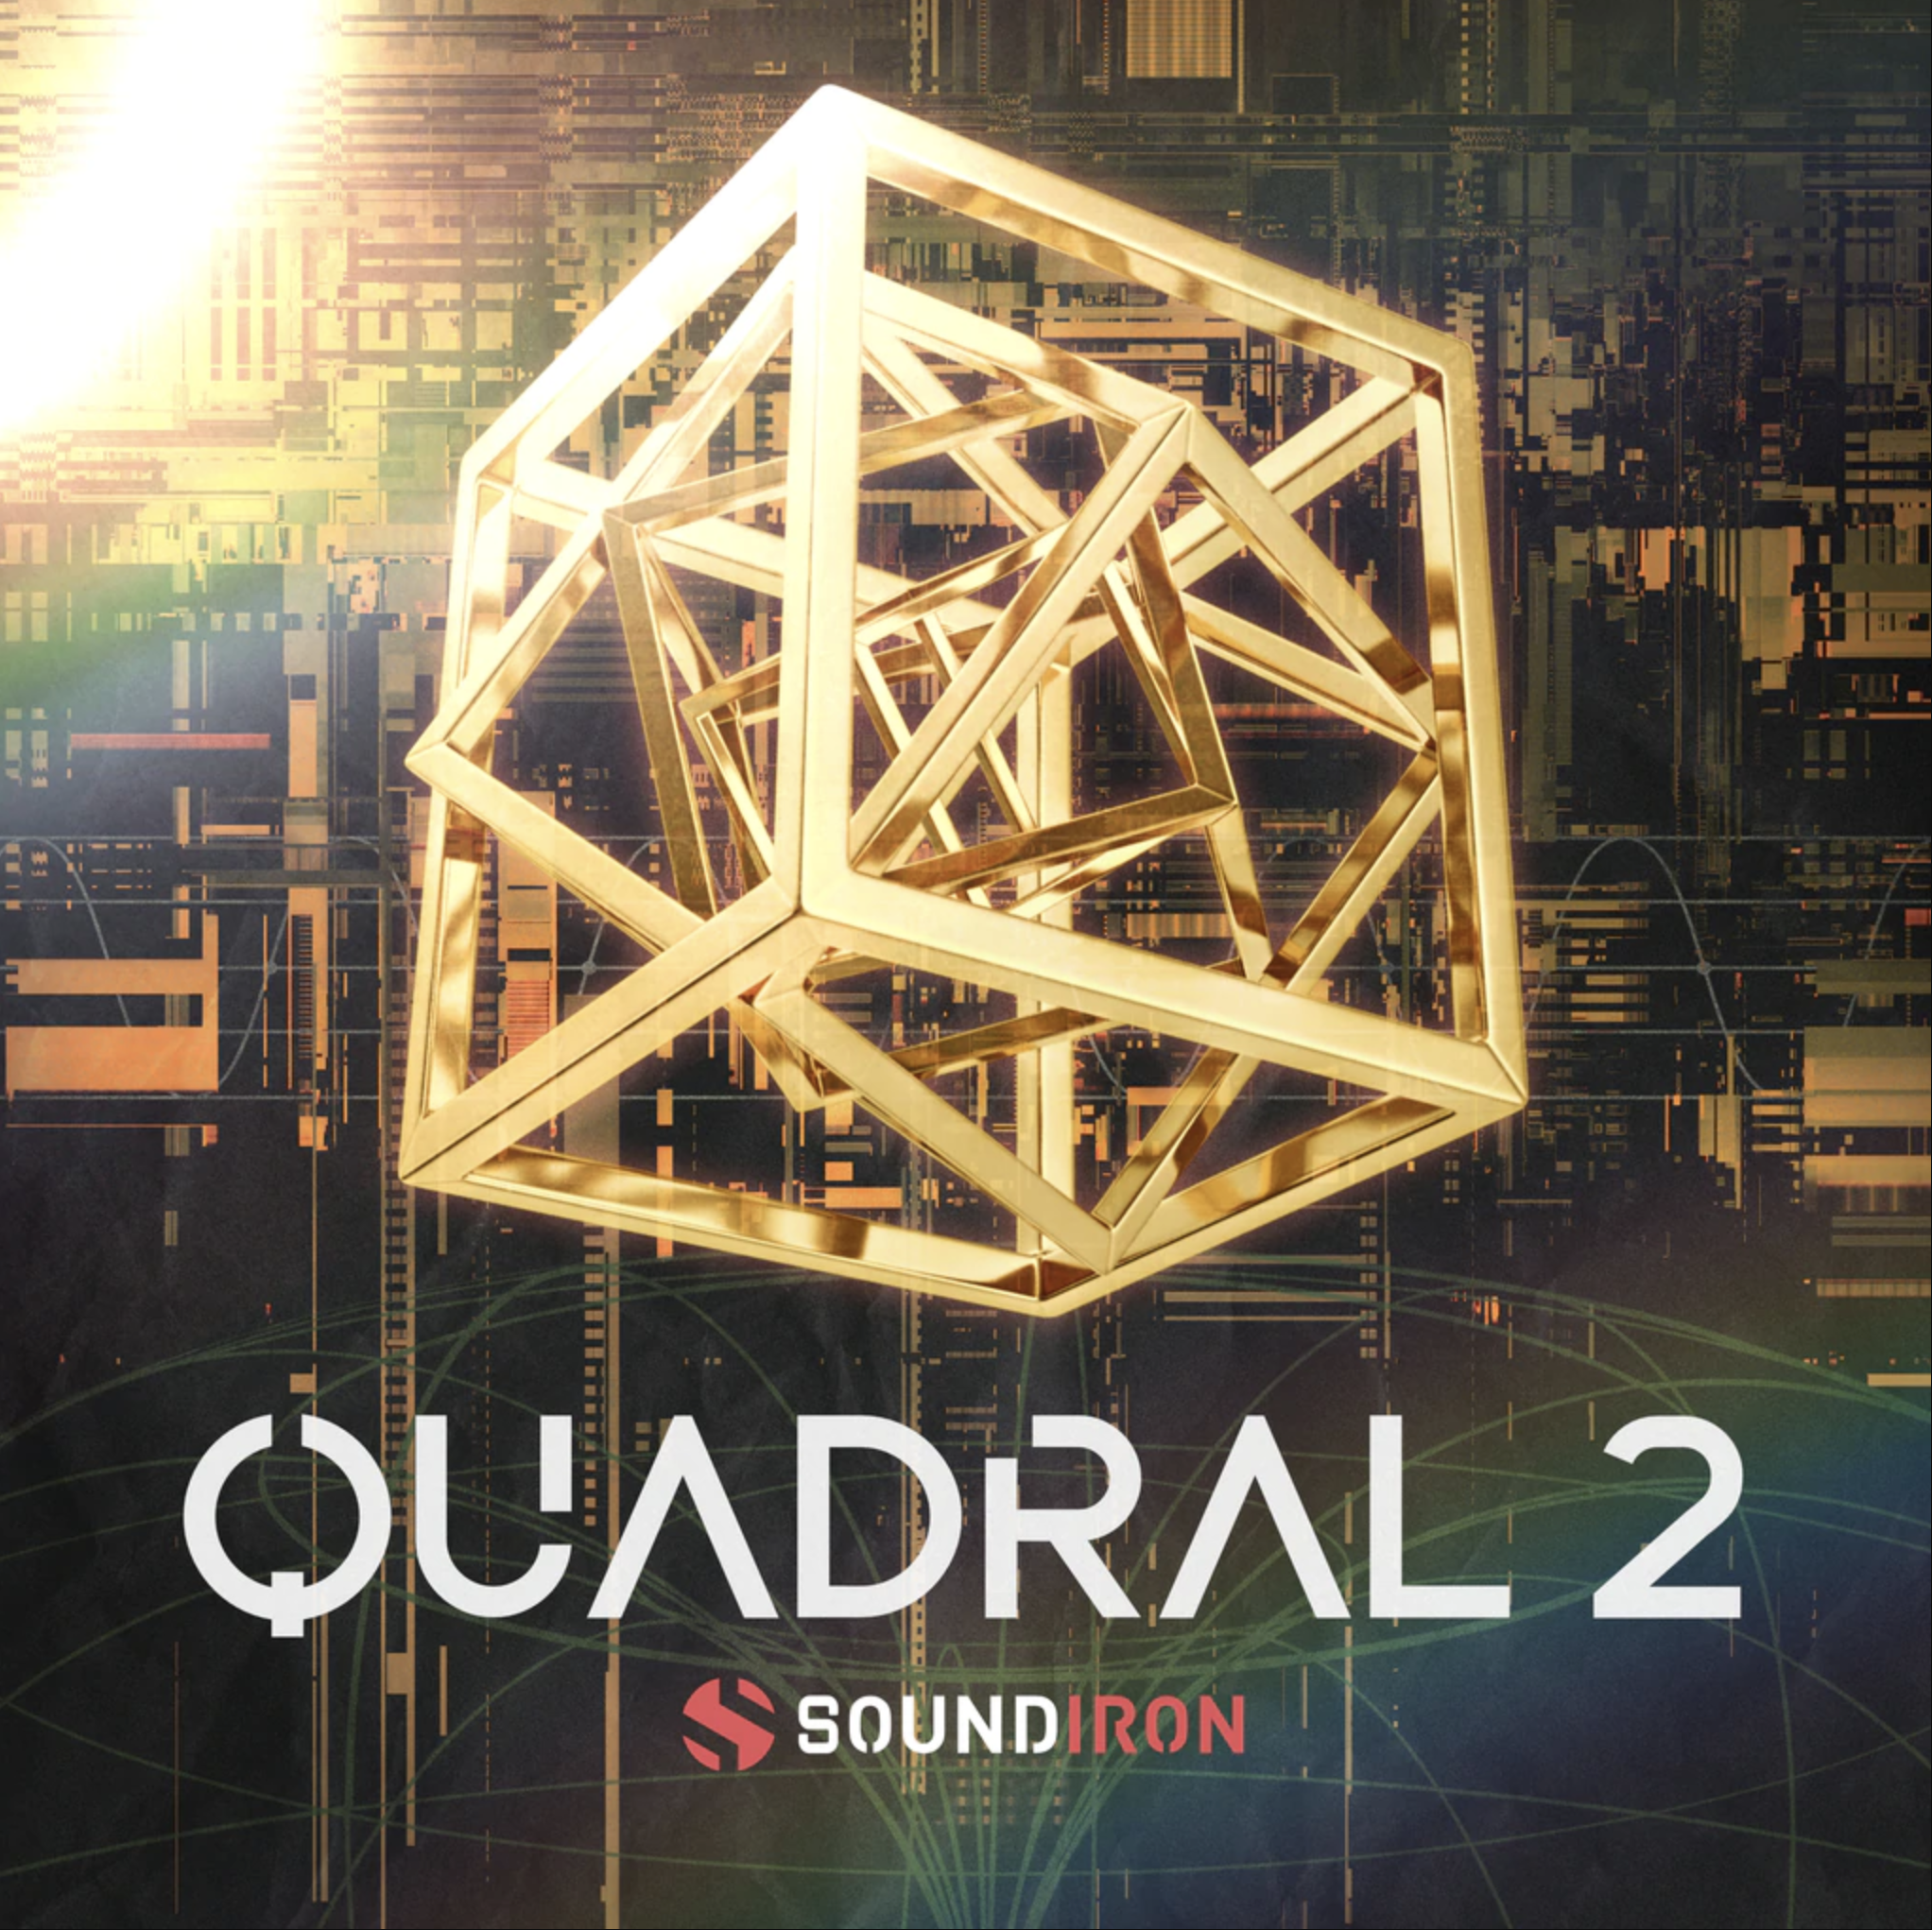 Quadral 2 by Soundiron – A New Imagination Laboratory for Electronic Scores